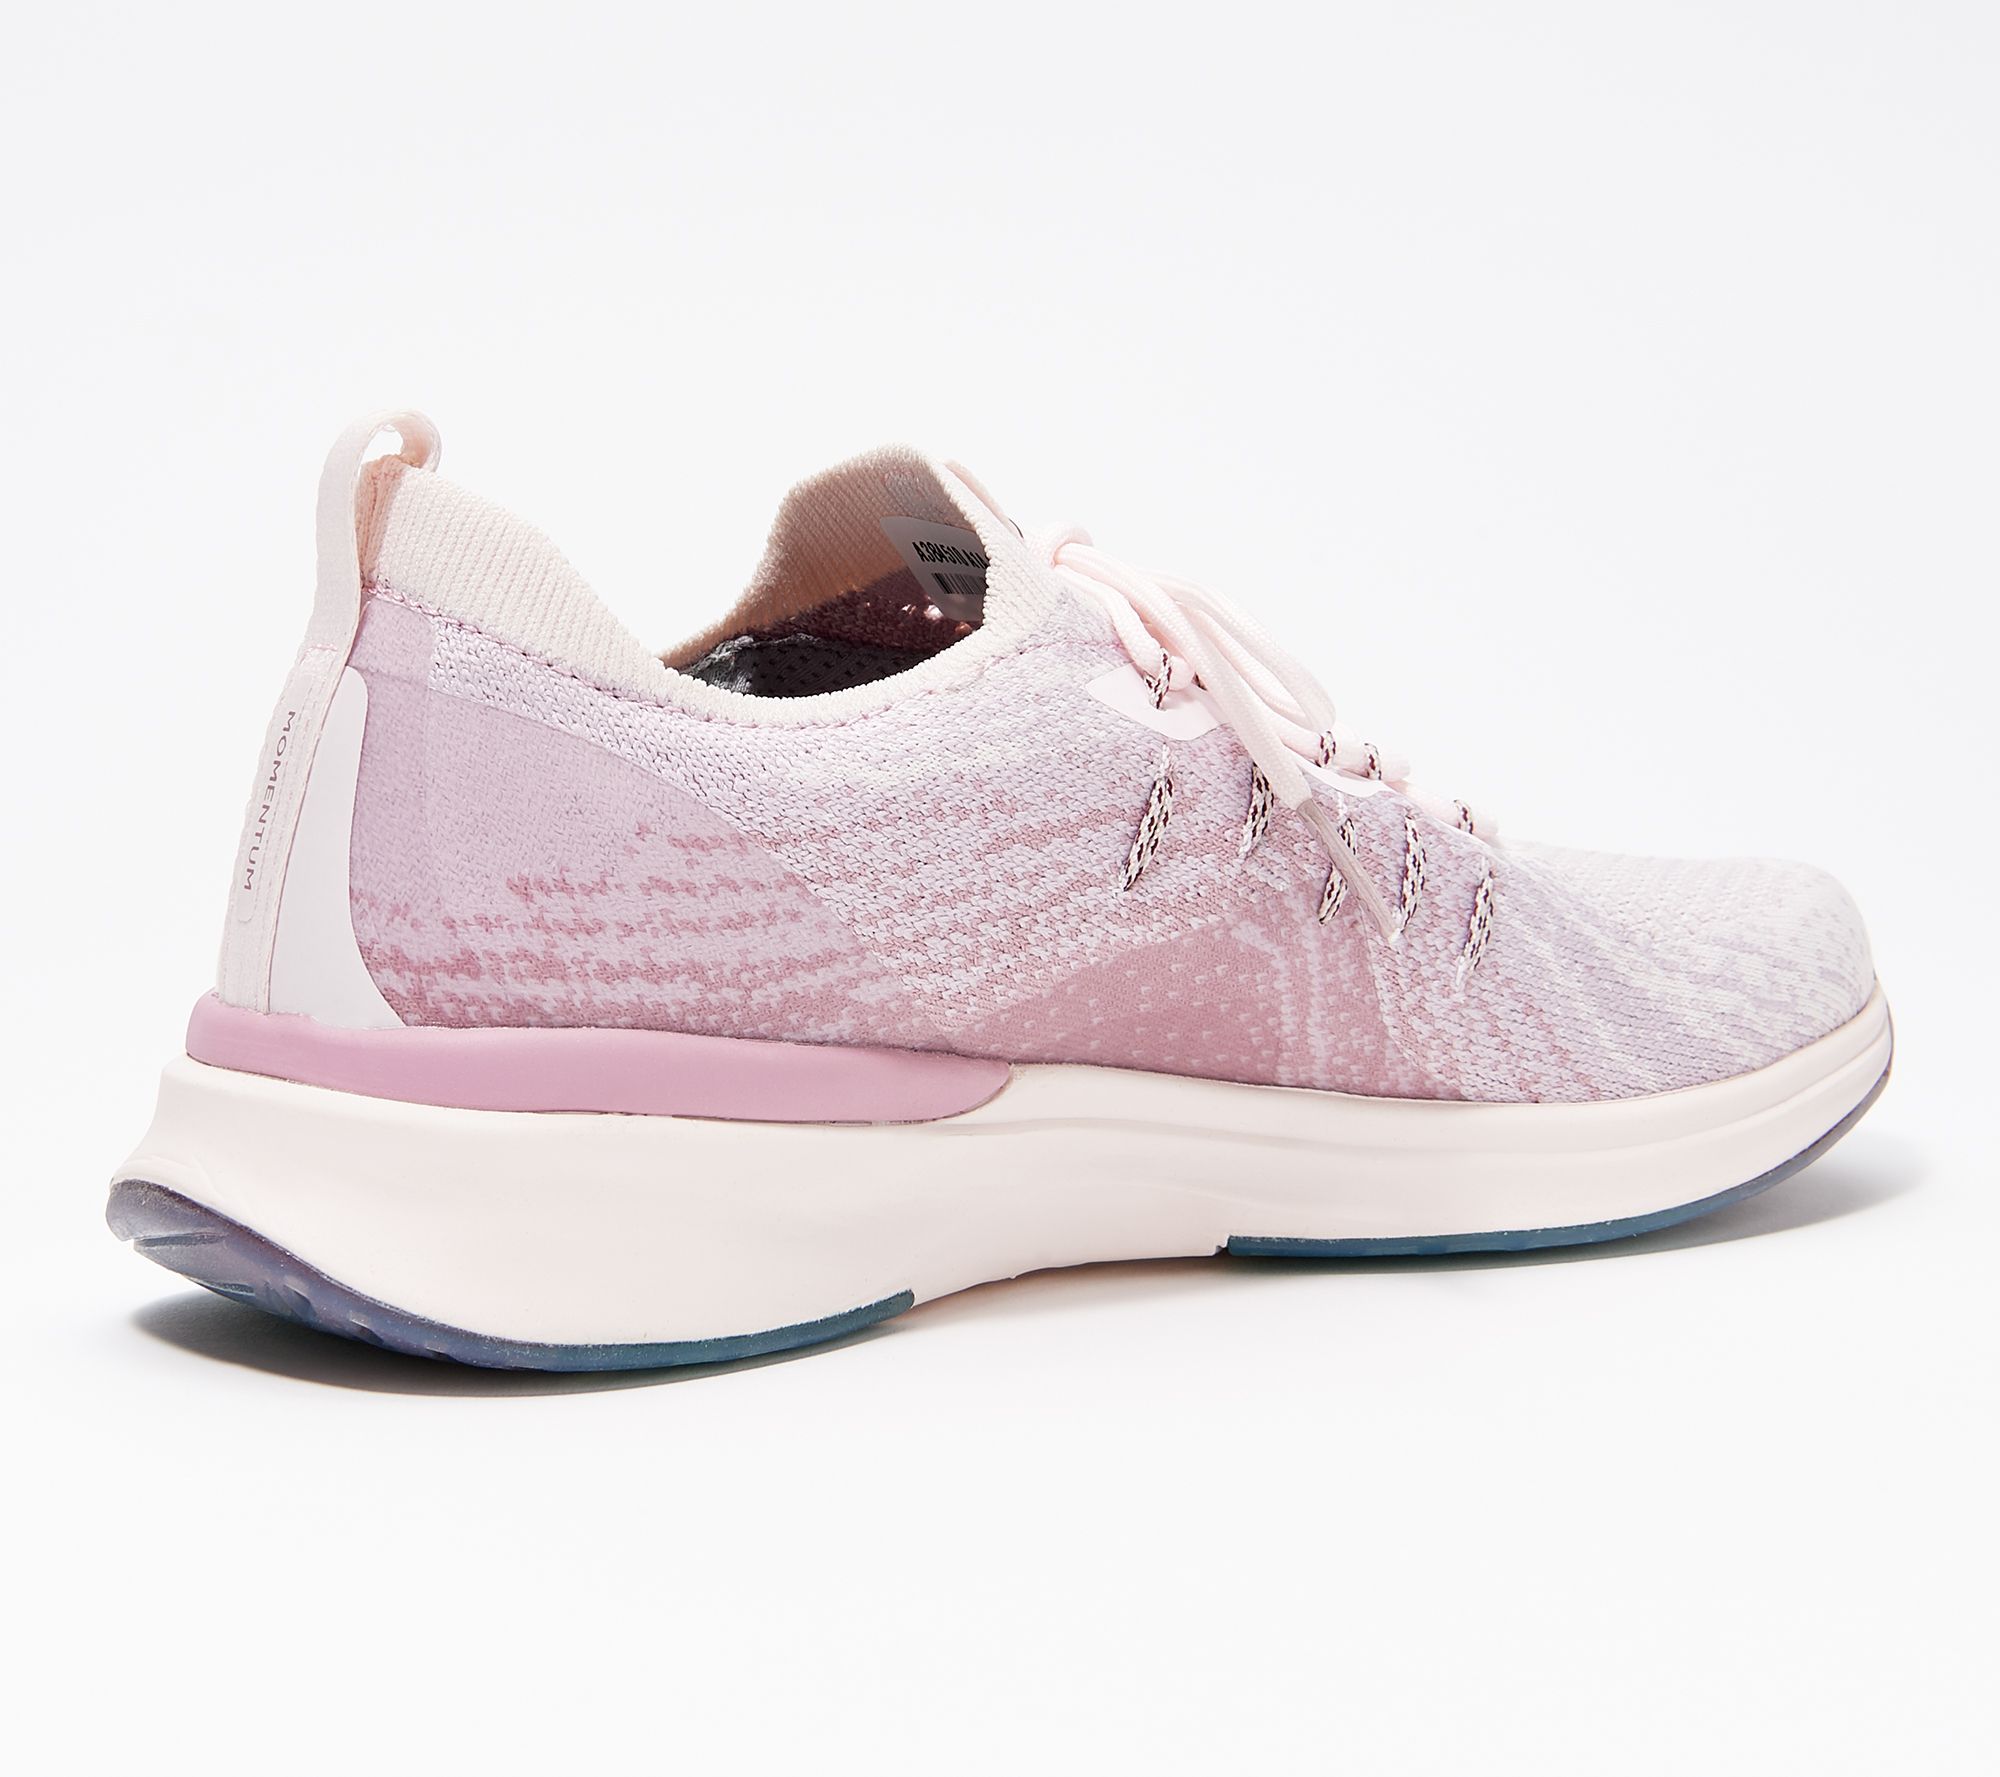 Ryka fEMPOWER Knit Lace-Up Sneakers - Momentum - QVC.com